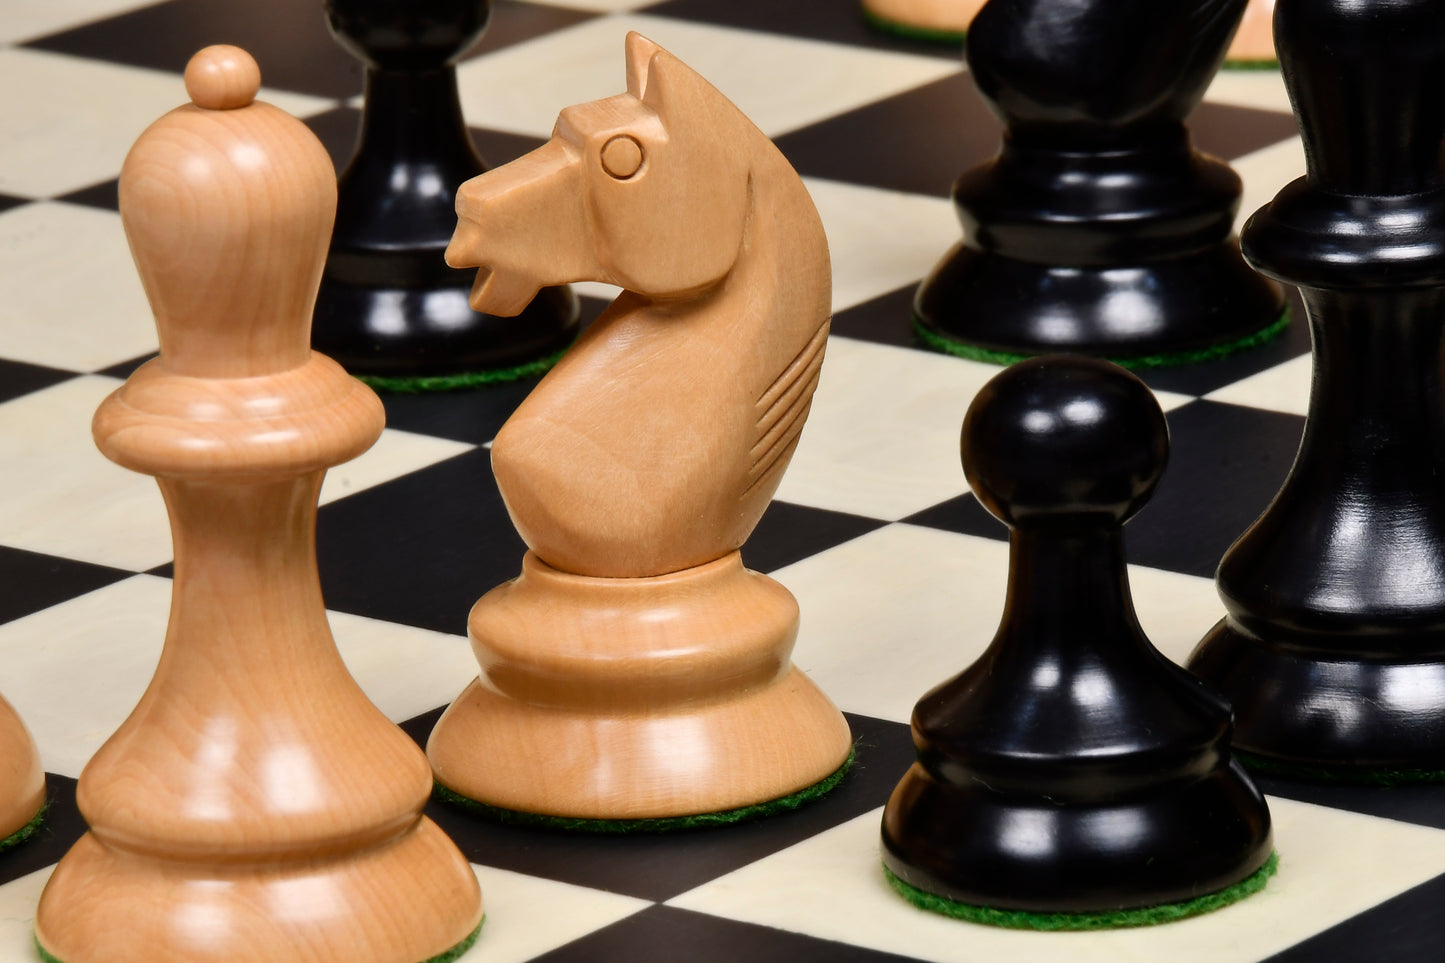 The 1937 7th Stockholm Olympiad Reproduced Chess Pieces in Ebonized & Box Wood - 3.75" King